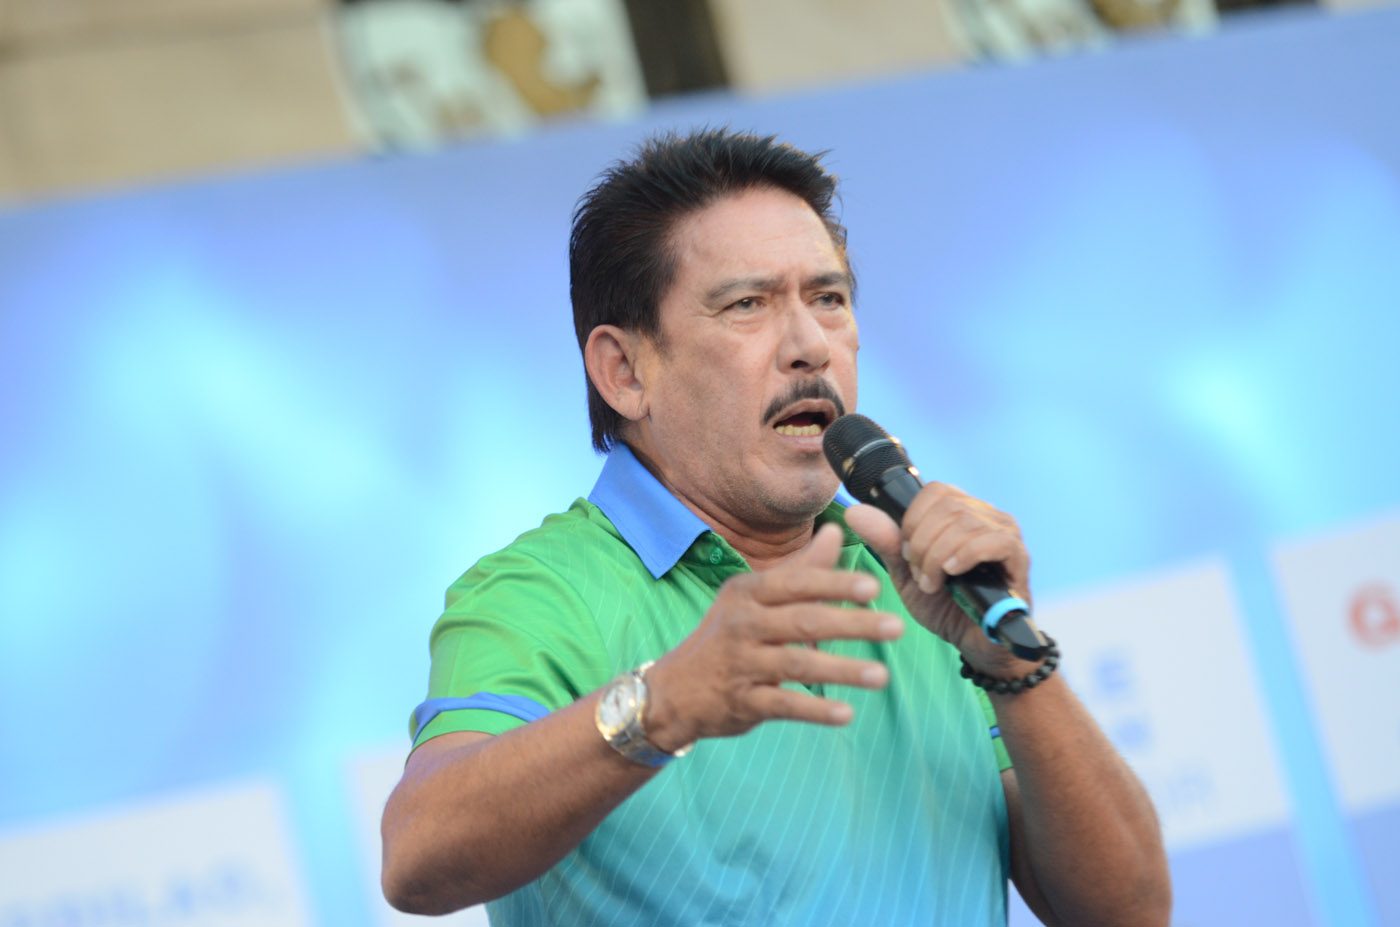 MTRCB summons ‘Eat Bulaga’ officials over Tito Sotto’s remarks